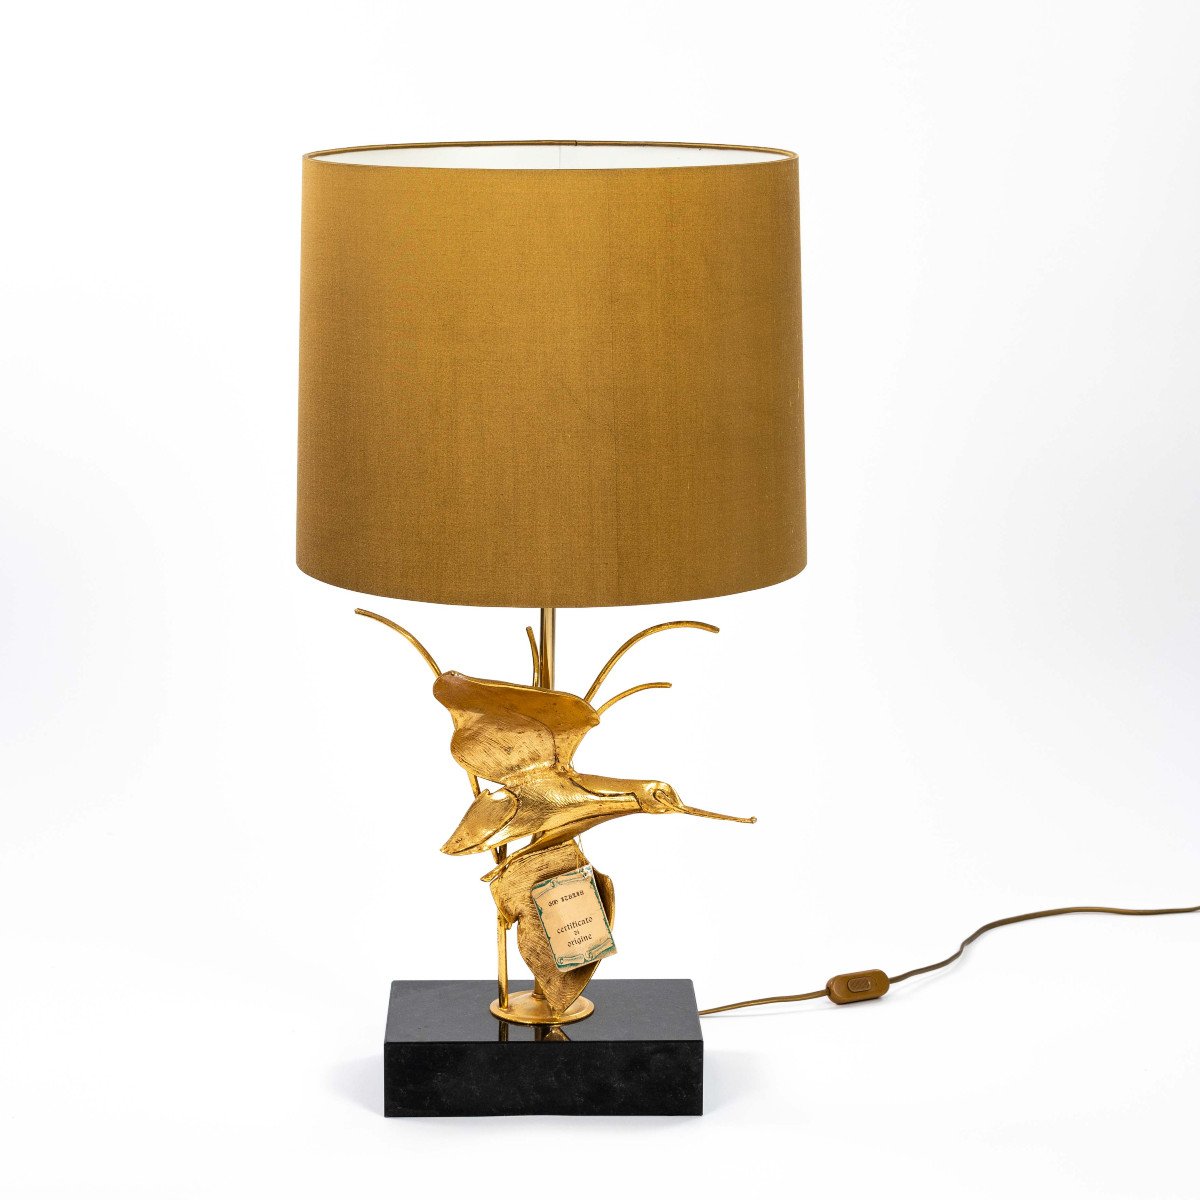 Midcentury Italian Bronze Sculptured Table Lamp By Gm Italia Bronze Colored Lamp Shade